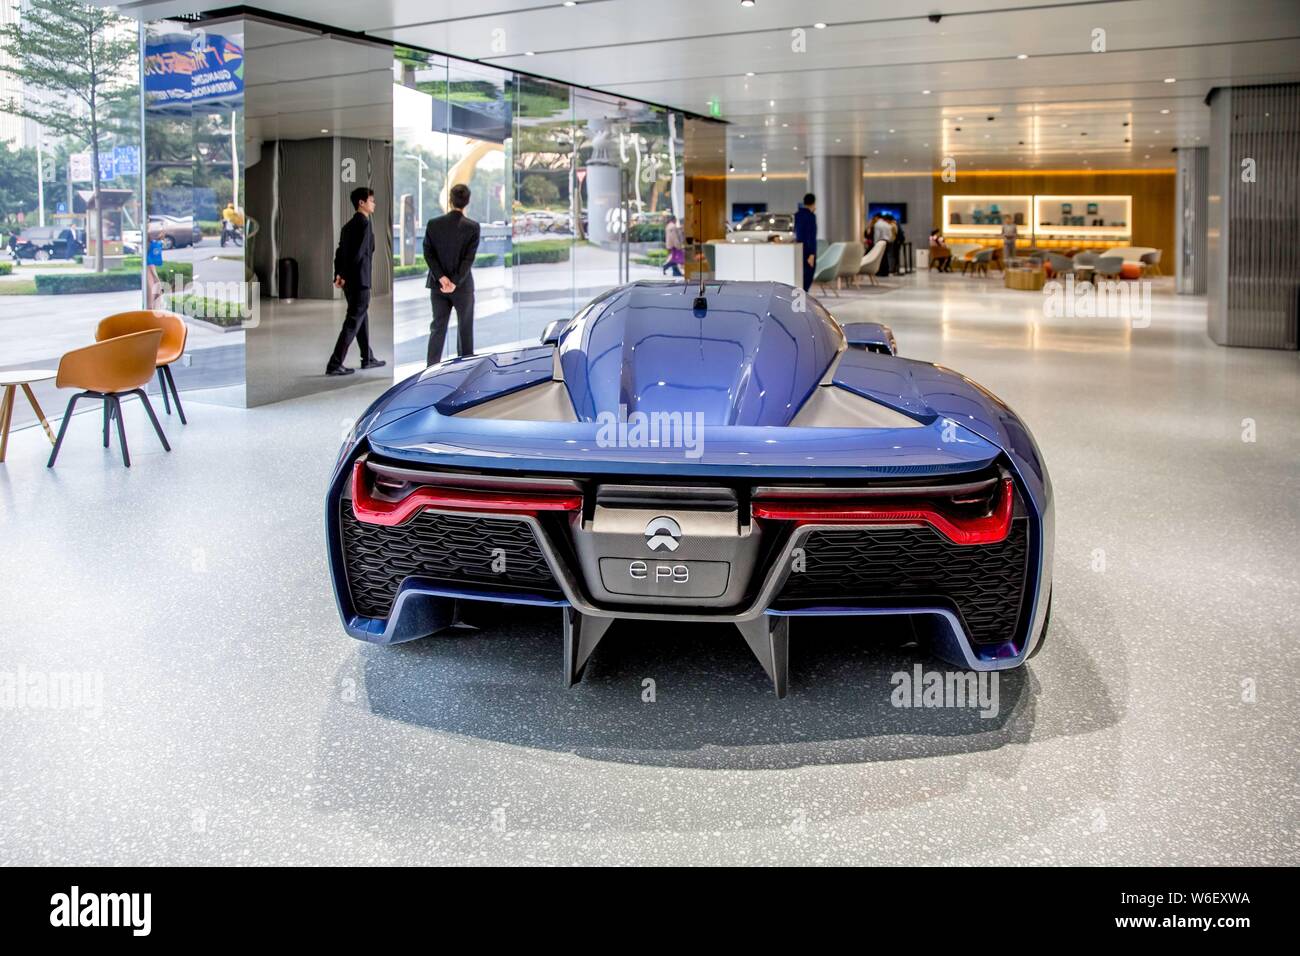 File A Nextev Nio Ep9 Electric Supercar Is On Display At The Fourth Nio S User Center Nio House In Guangzhou City South China S Guangdong Provin Stock Photo Alamy